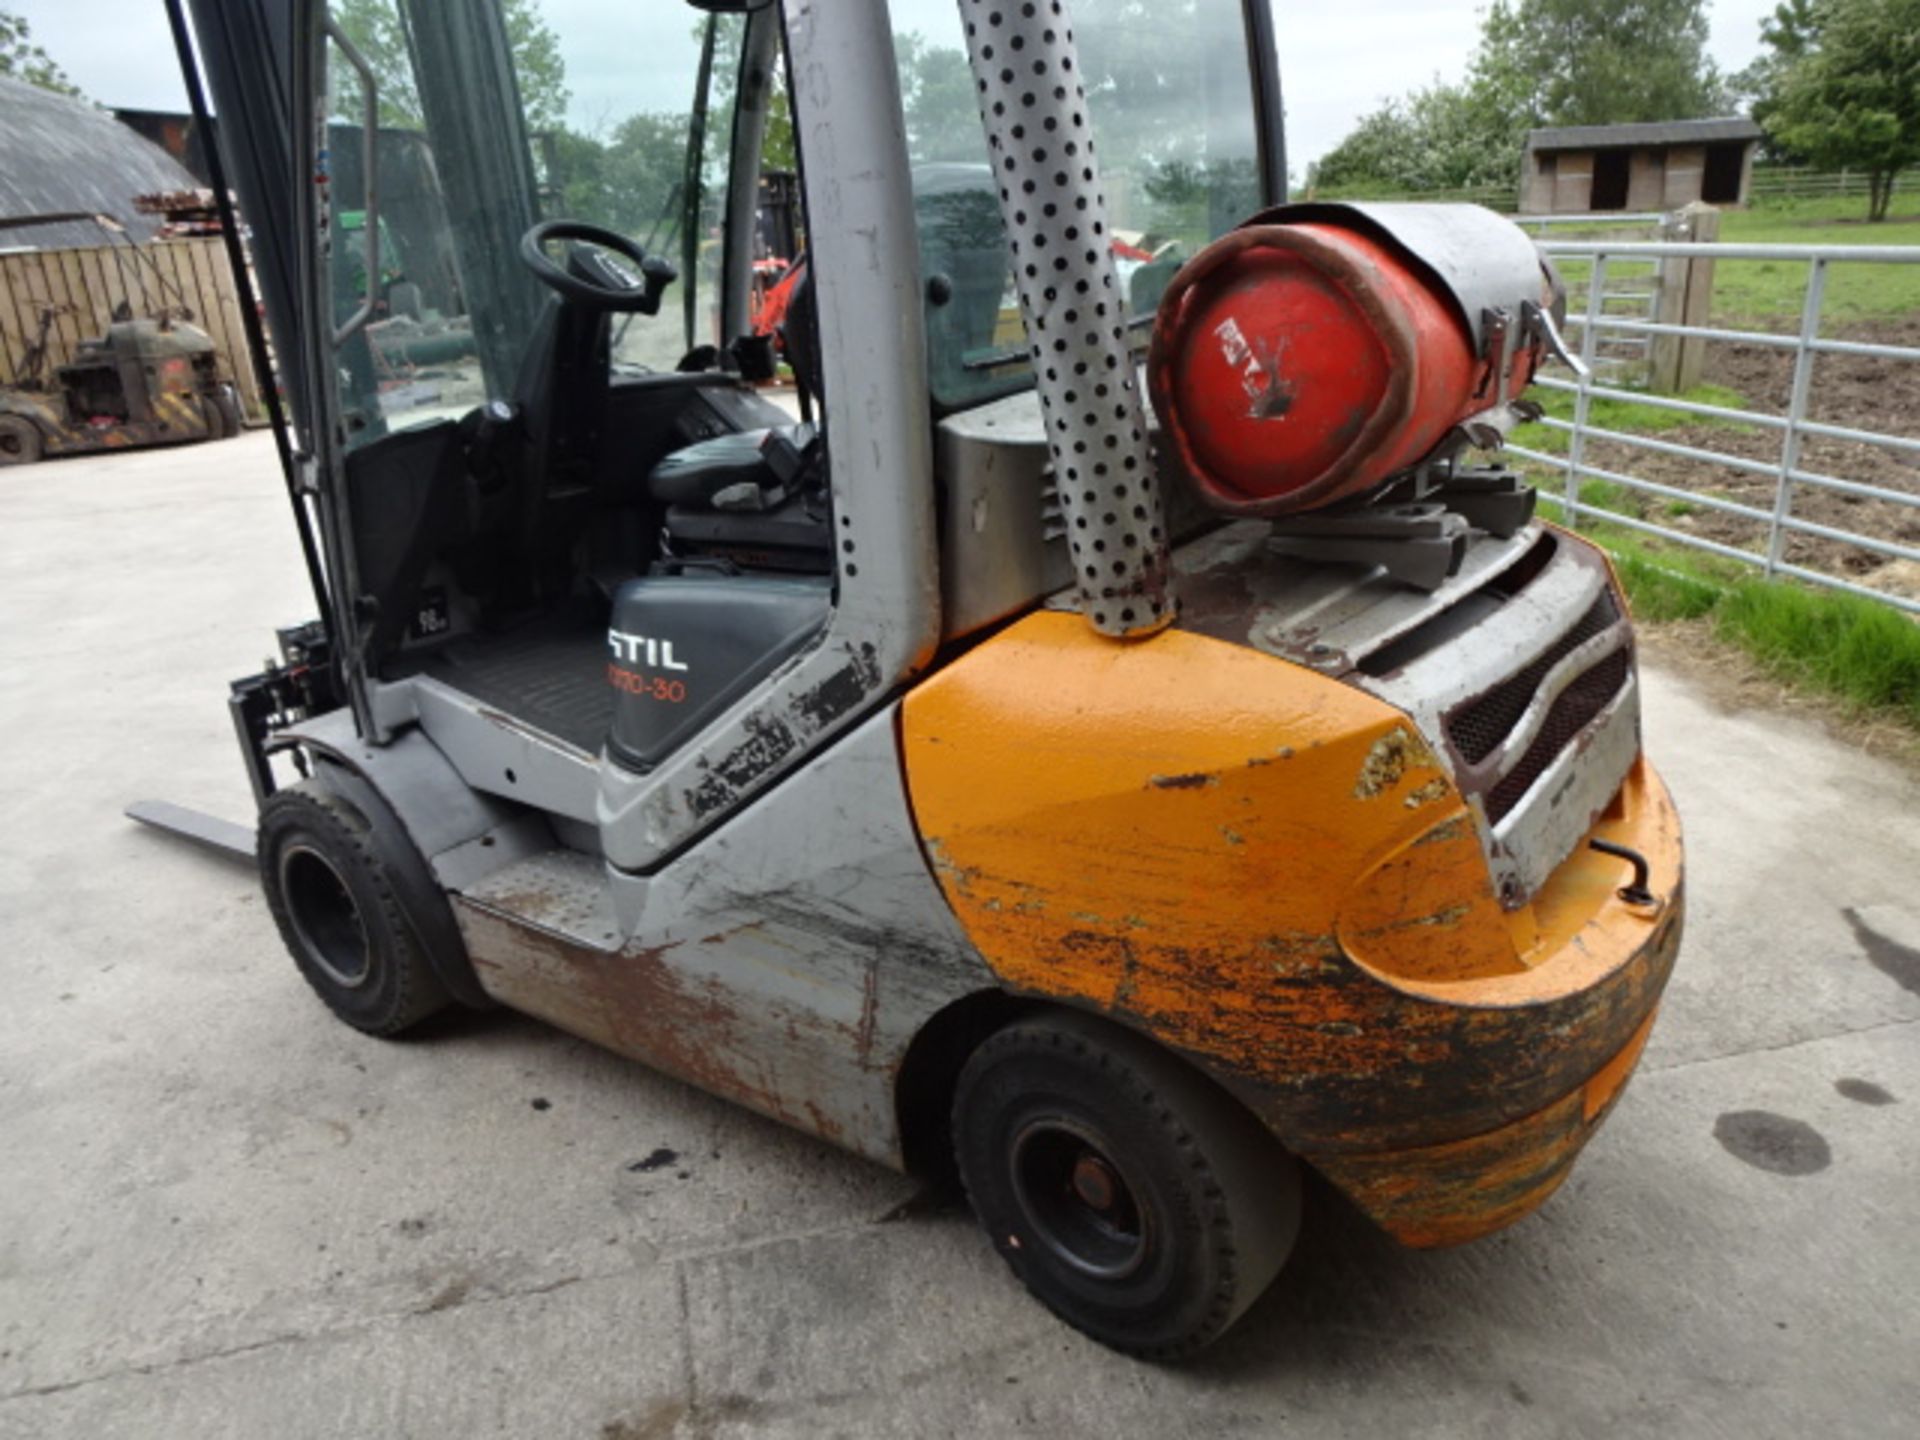 2007 STILL RX70-30T 3t gas driven forklift truck S/n: 517327002306 with duplex mast, new forks & 3rd - Image 6 of 9